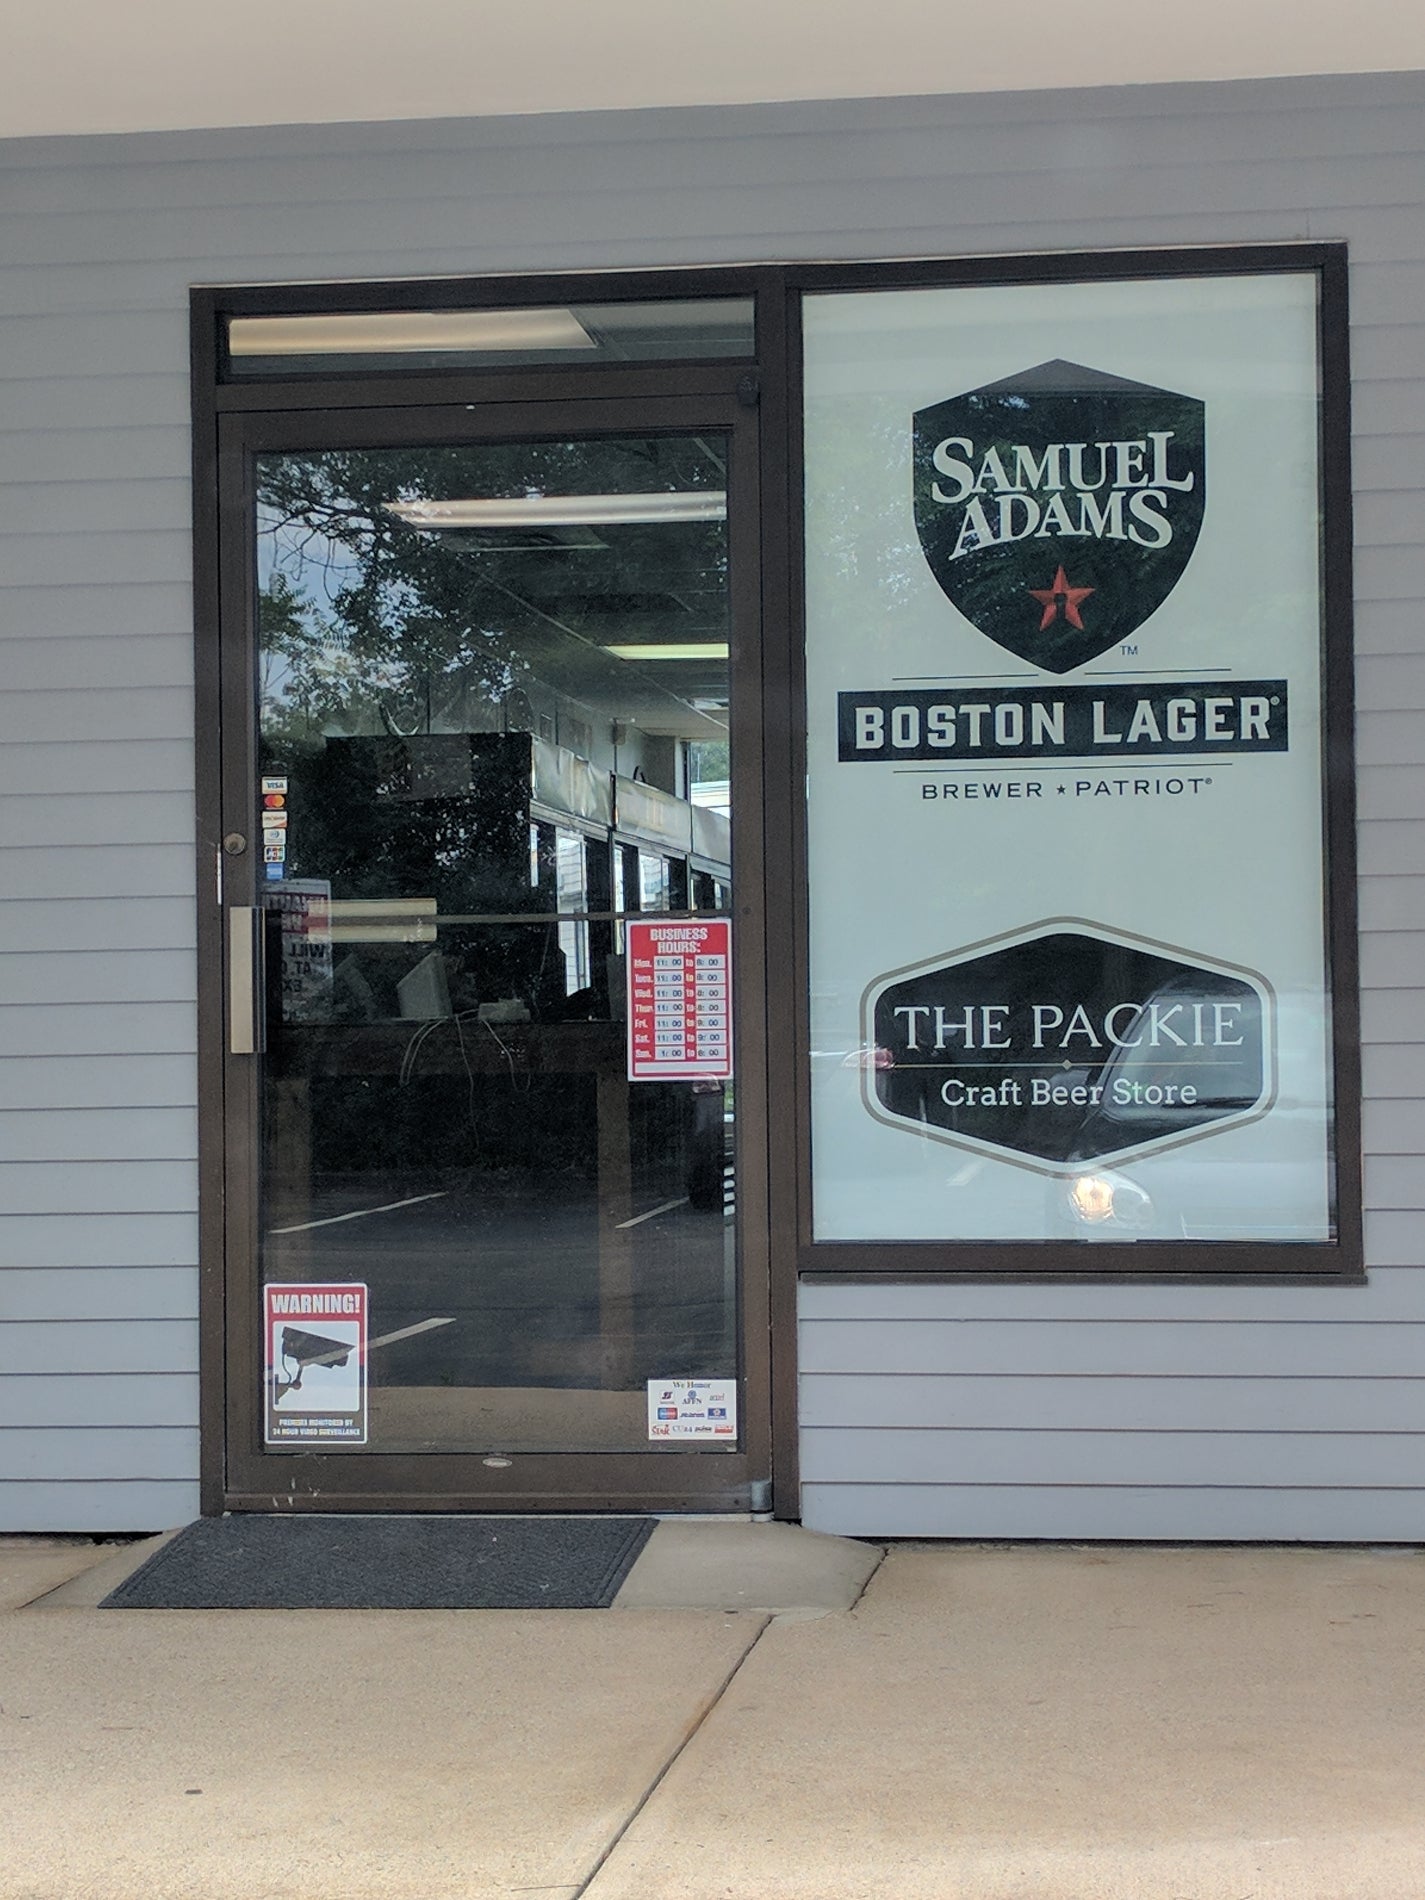 The Packie - Craft Beer Store - Introducing the brand new